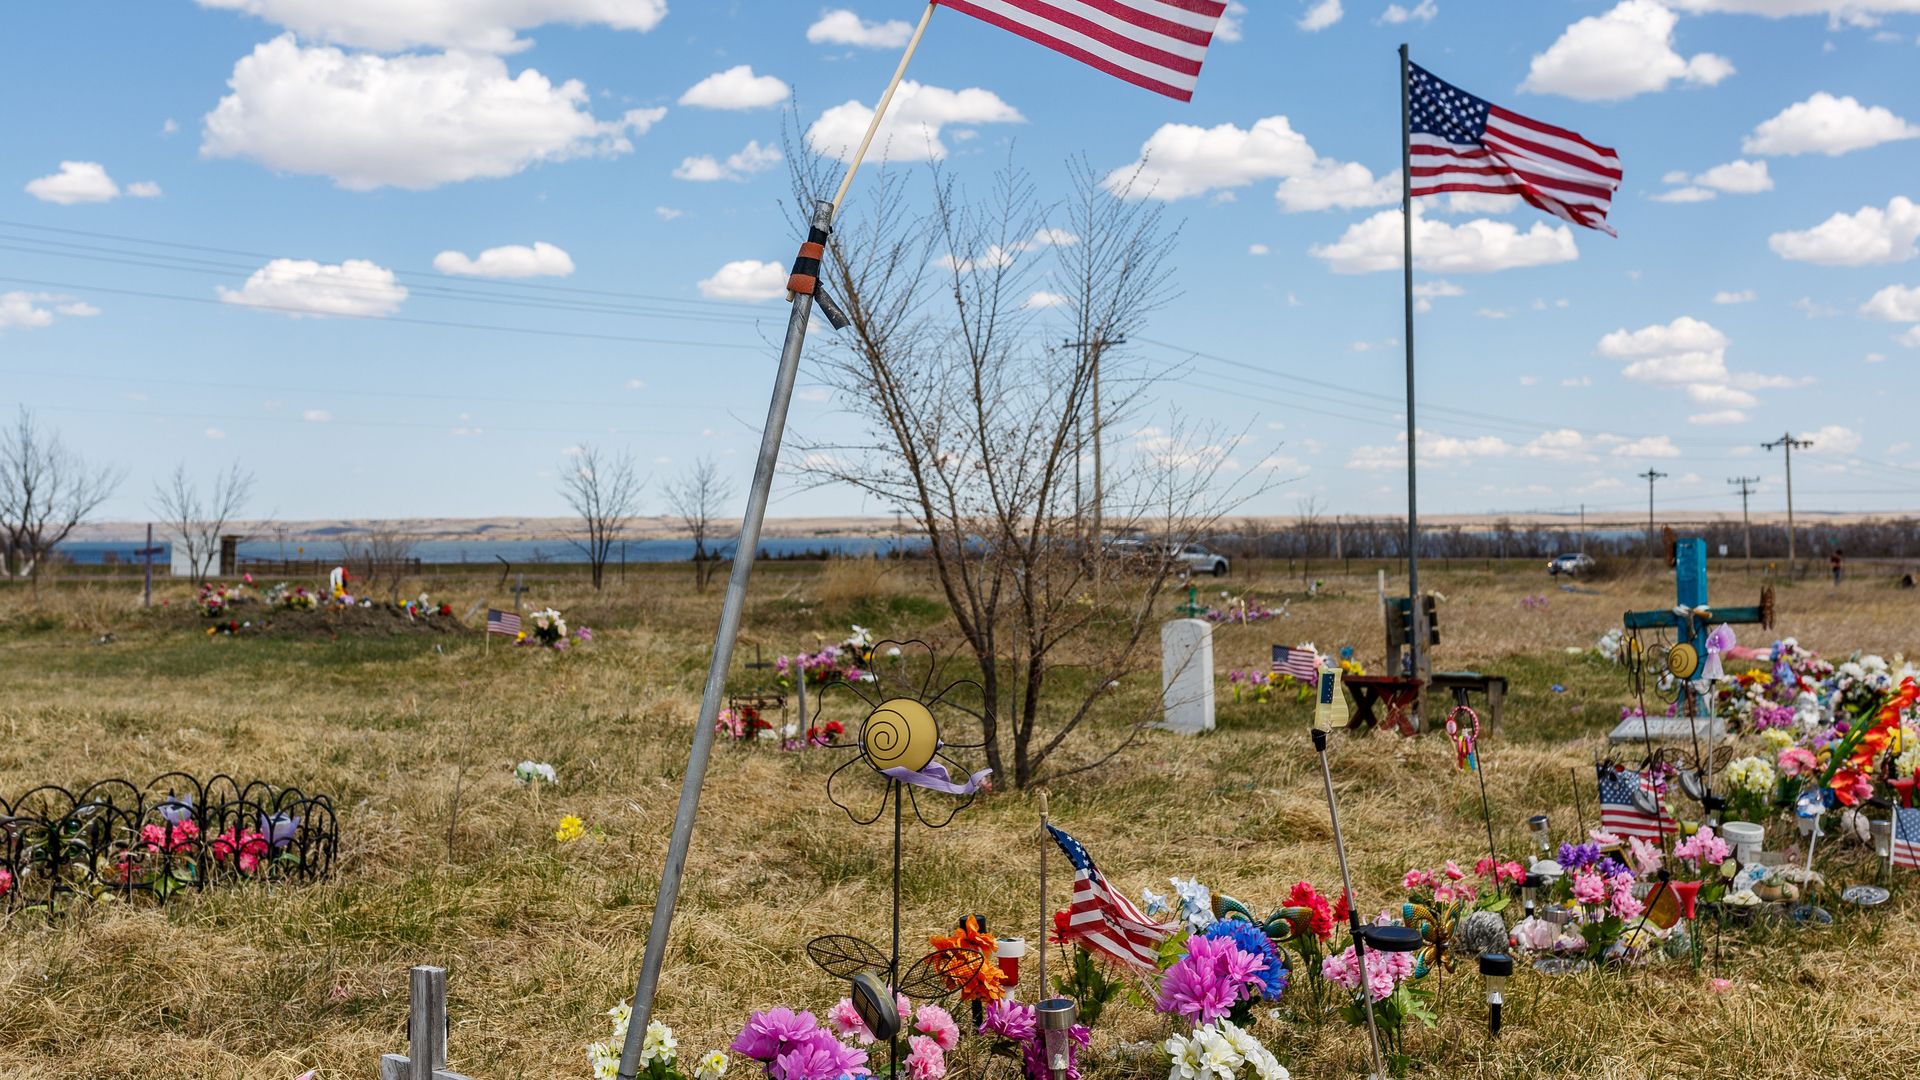 US flags fly near graves at the Lower Brule Indian Reservation